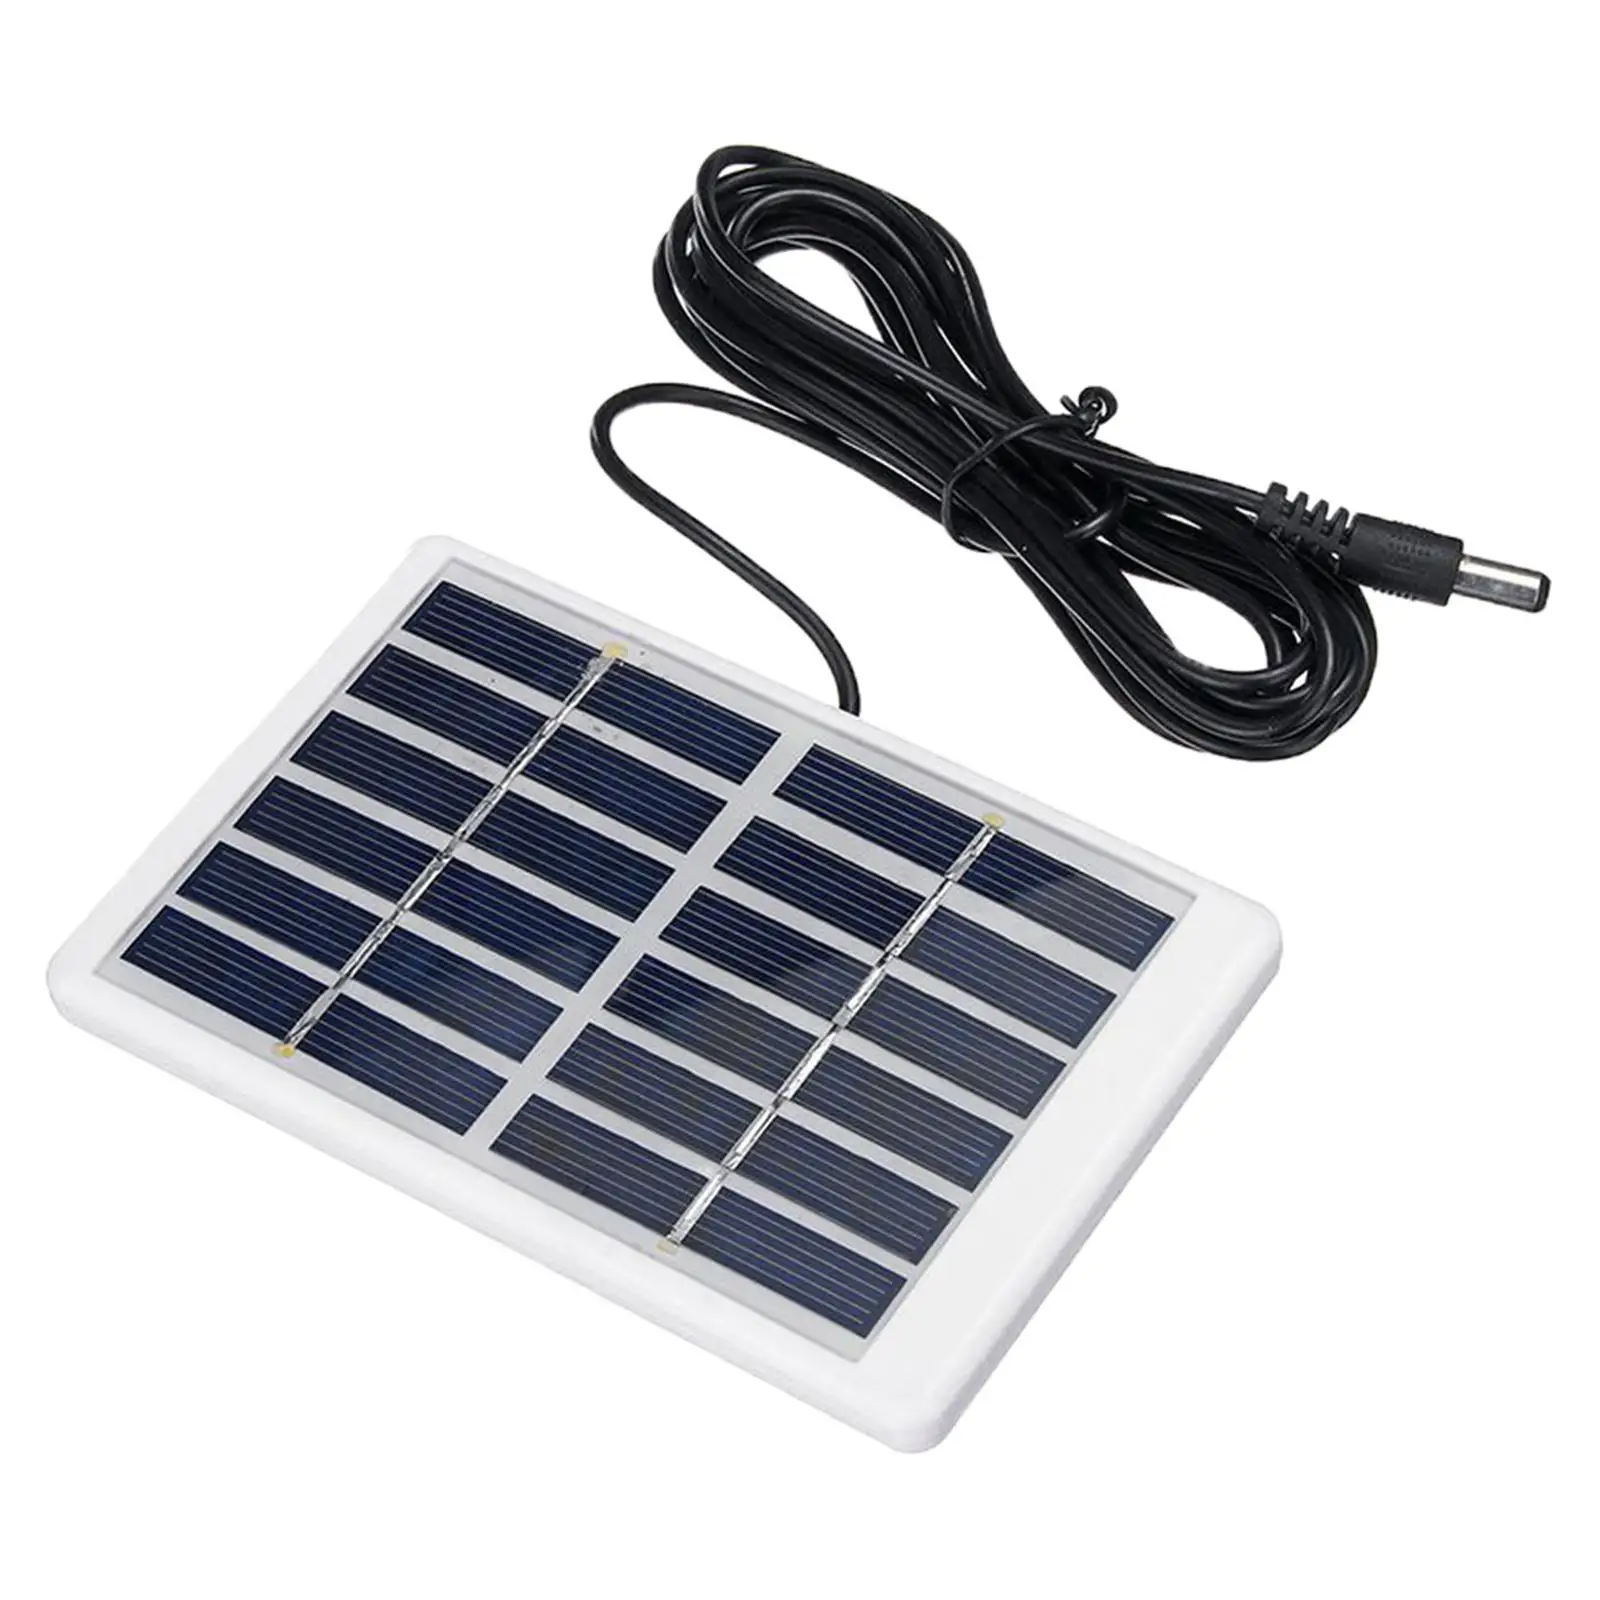 Portable DIY Battery Power Charge Module Solar Panel Charger Phone 3 Meters DC Cable Charger Polycrystalline DIY Mini Small